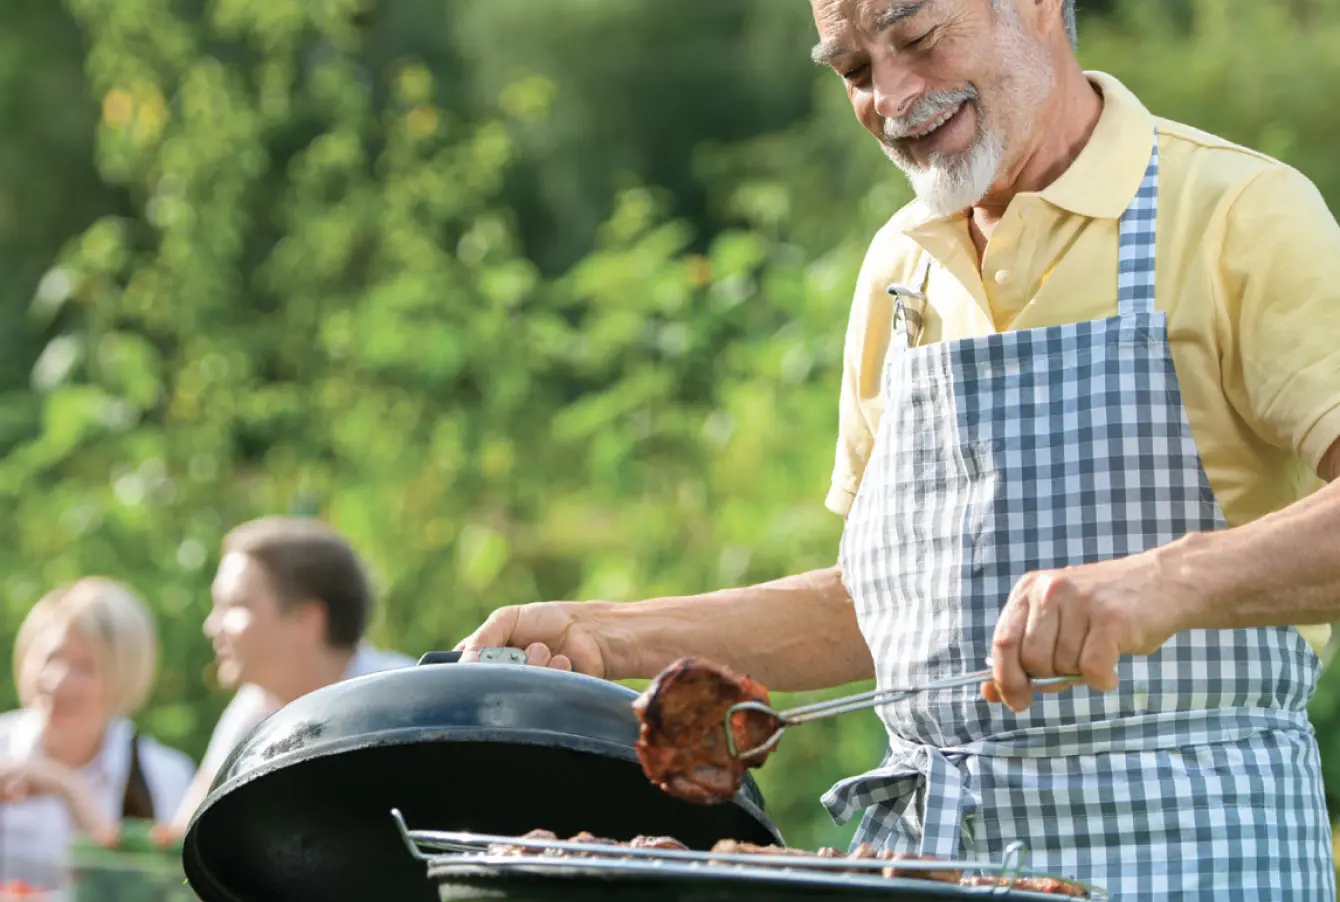 Smiling man with apron holding up a barbeque lid in right hand and tongs picking up the next selection for the grill in the left. A nice sunny day, some guests sitting at a picnic table blurred out in the background.